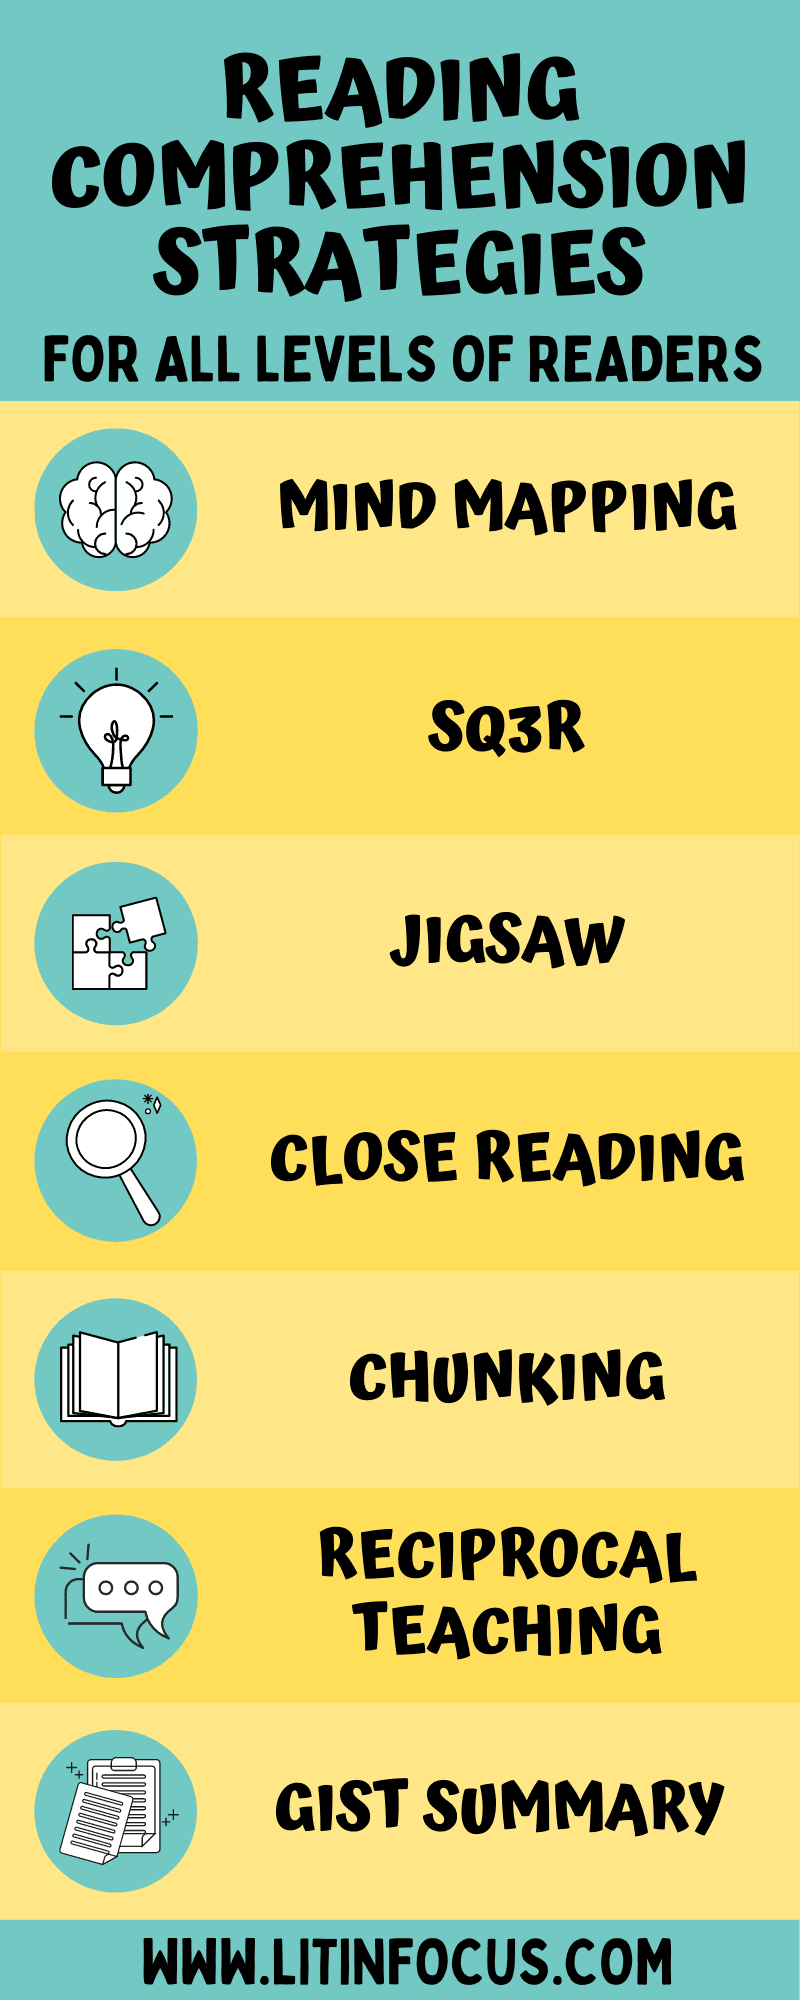 Reading Comprehension Strategies for All Levels of Learners